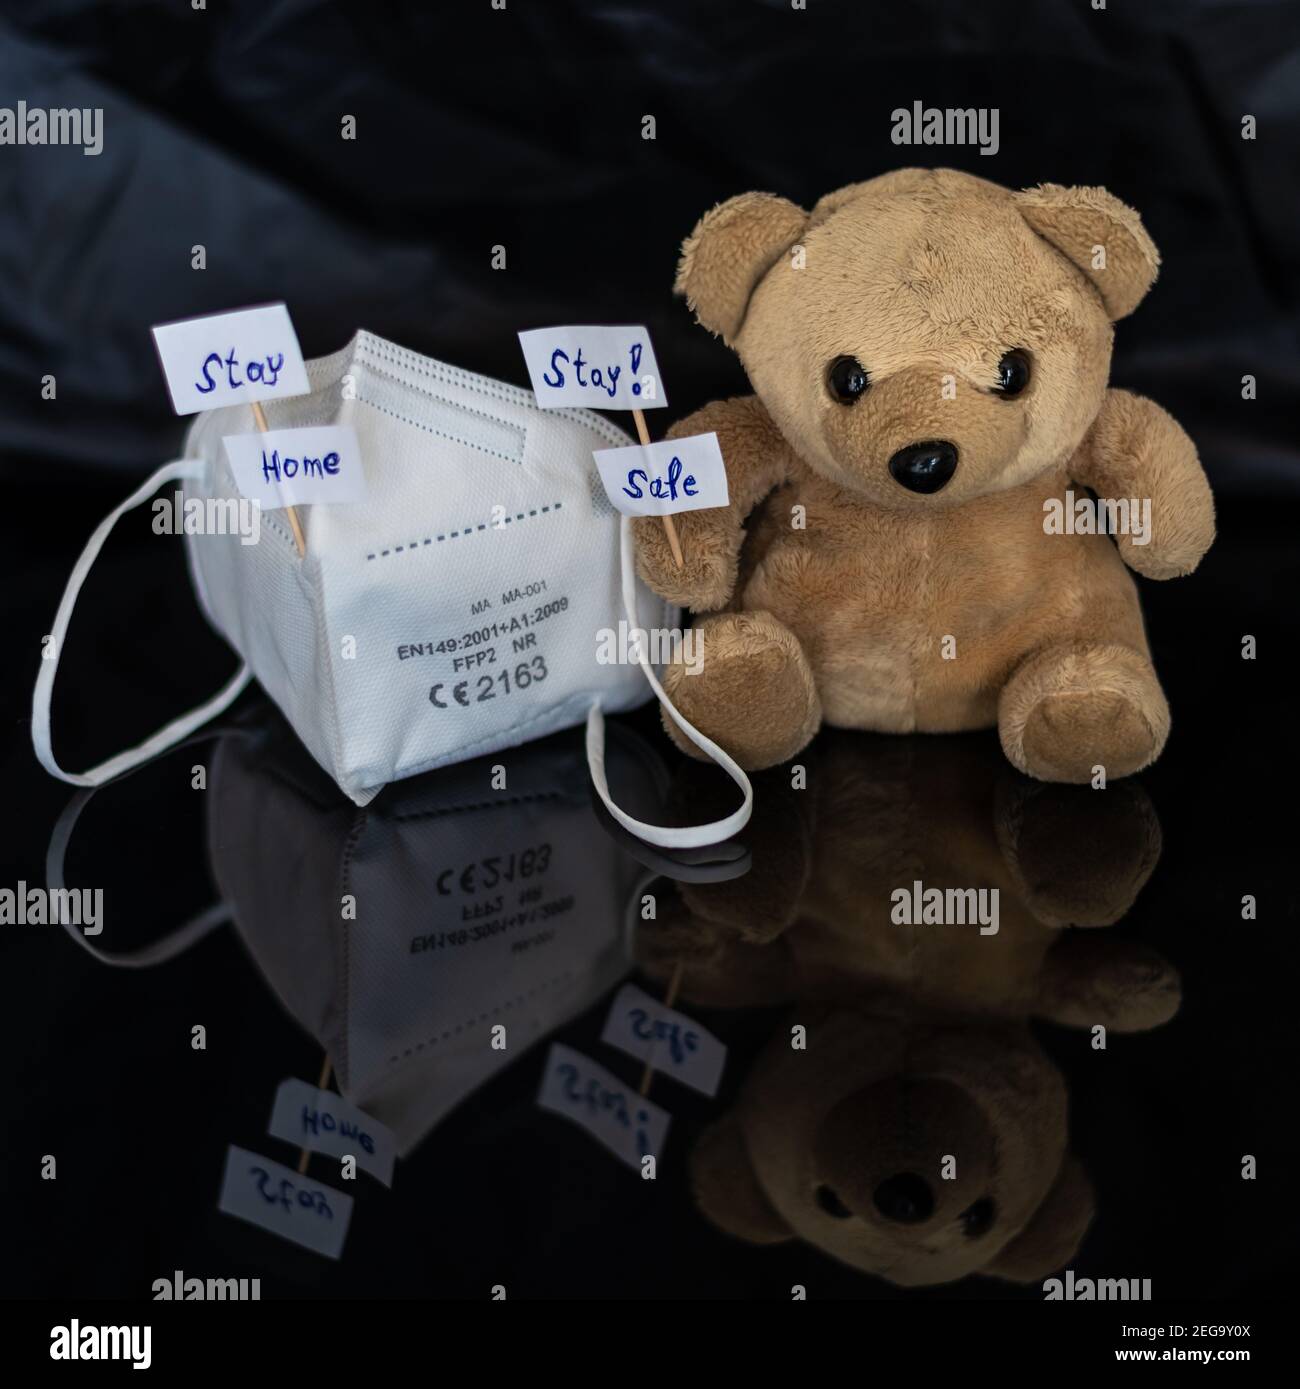 Stay home, stay safe,,covid pandemic,Teddy Bear Stock Photo